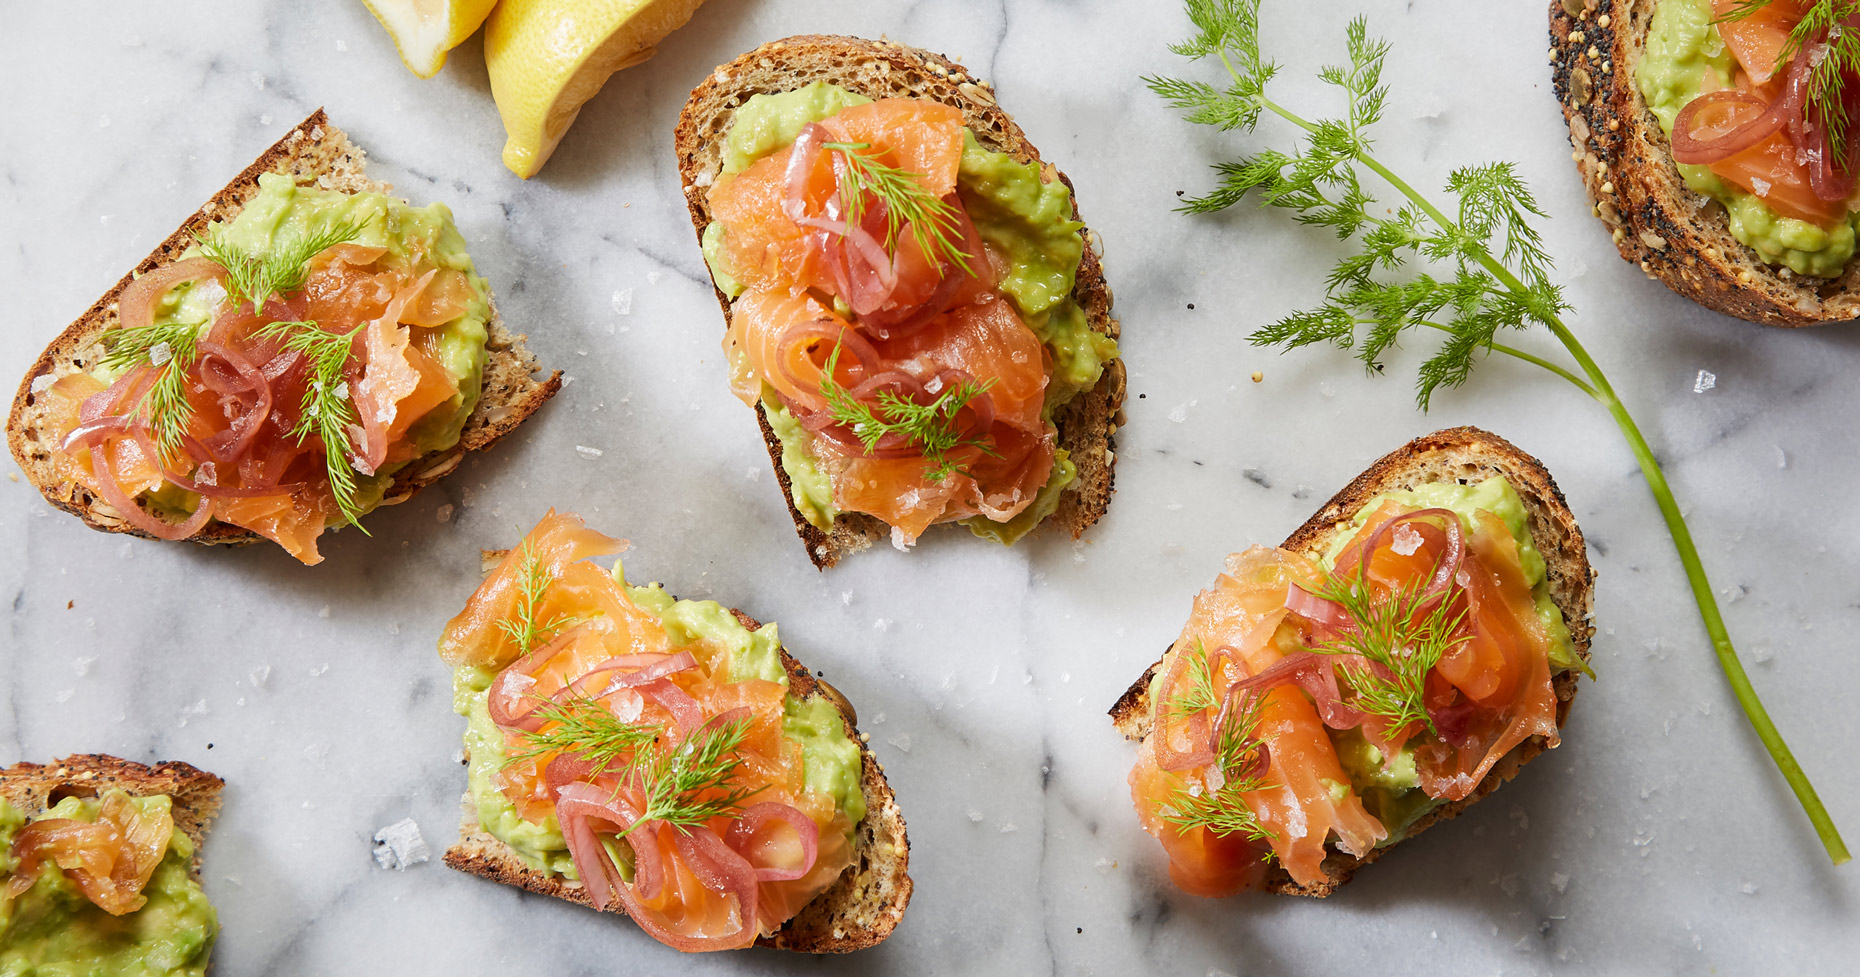 Cured Gravlax, Salmon, cured food. Sliced Salmon, dill, pickled red onion,guacamole, lemon, whole grain bread  photo by Chris Kessler Photography.  Chris Kessler is a freelance Photographer based in Milwaukee Wisconsin. Specializing in Food photography and portraiture.